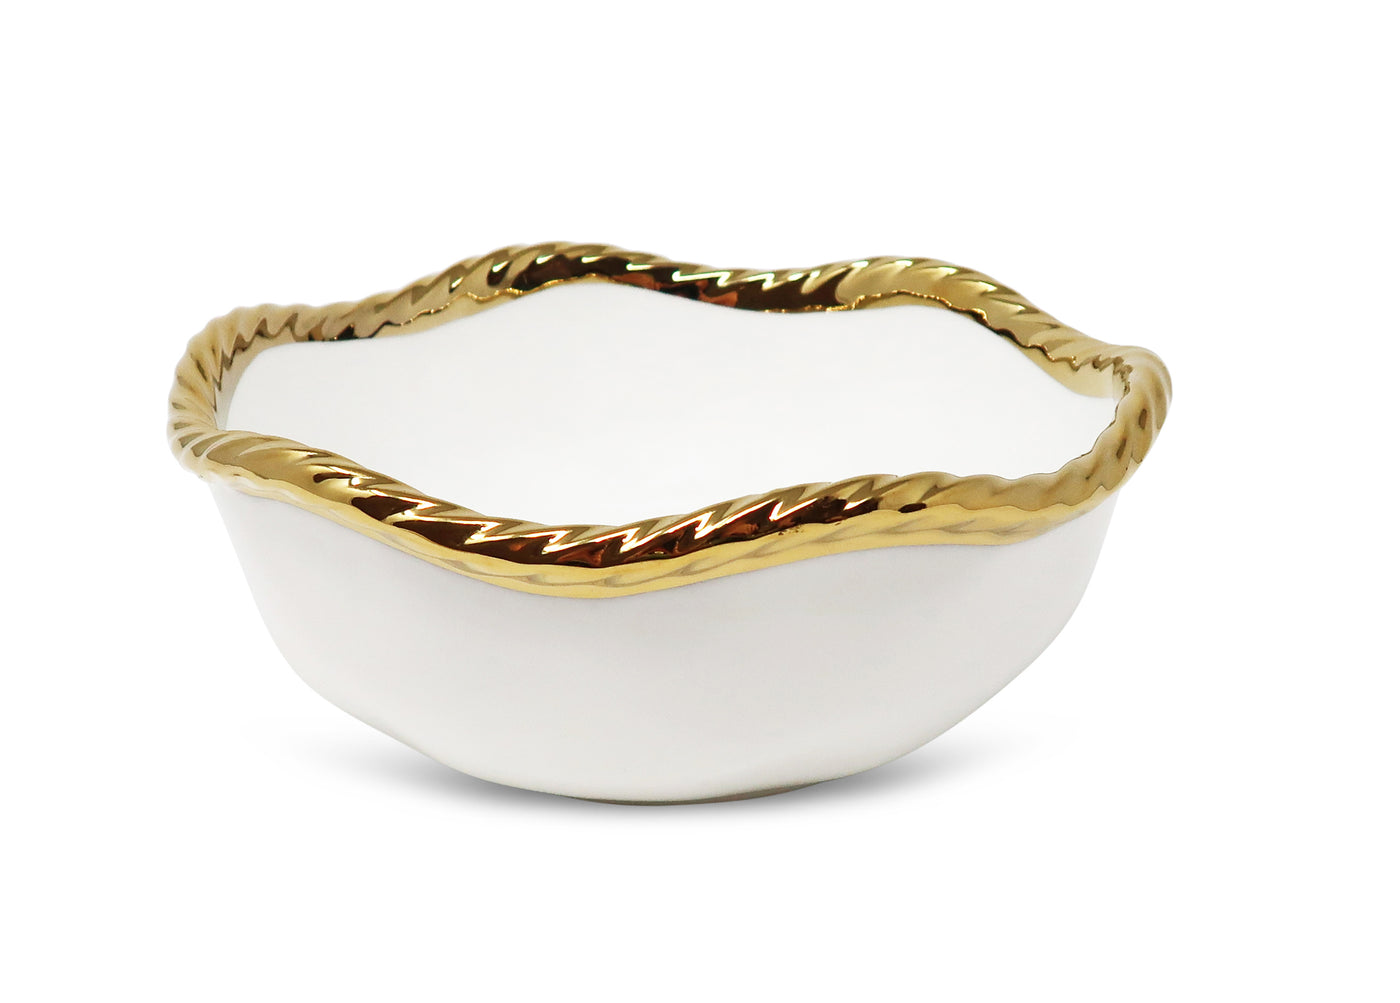 Set of 4 White Soup Bowls New Bone China with Gold Rope Edge